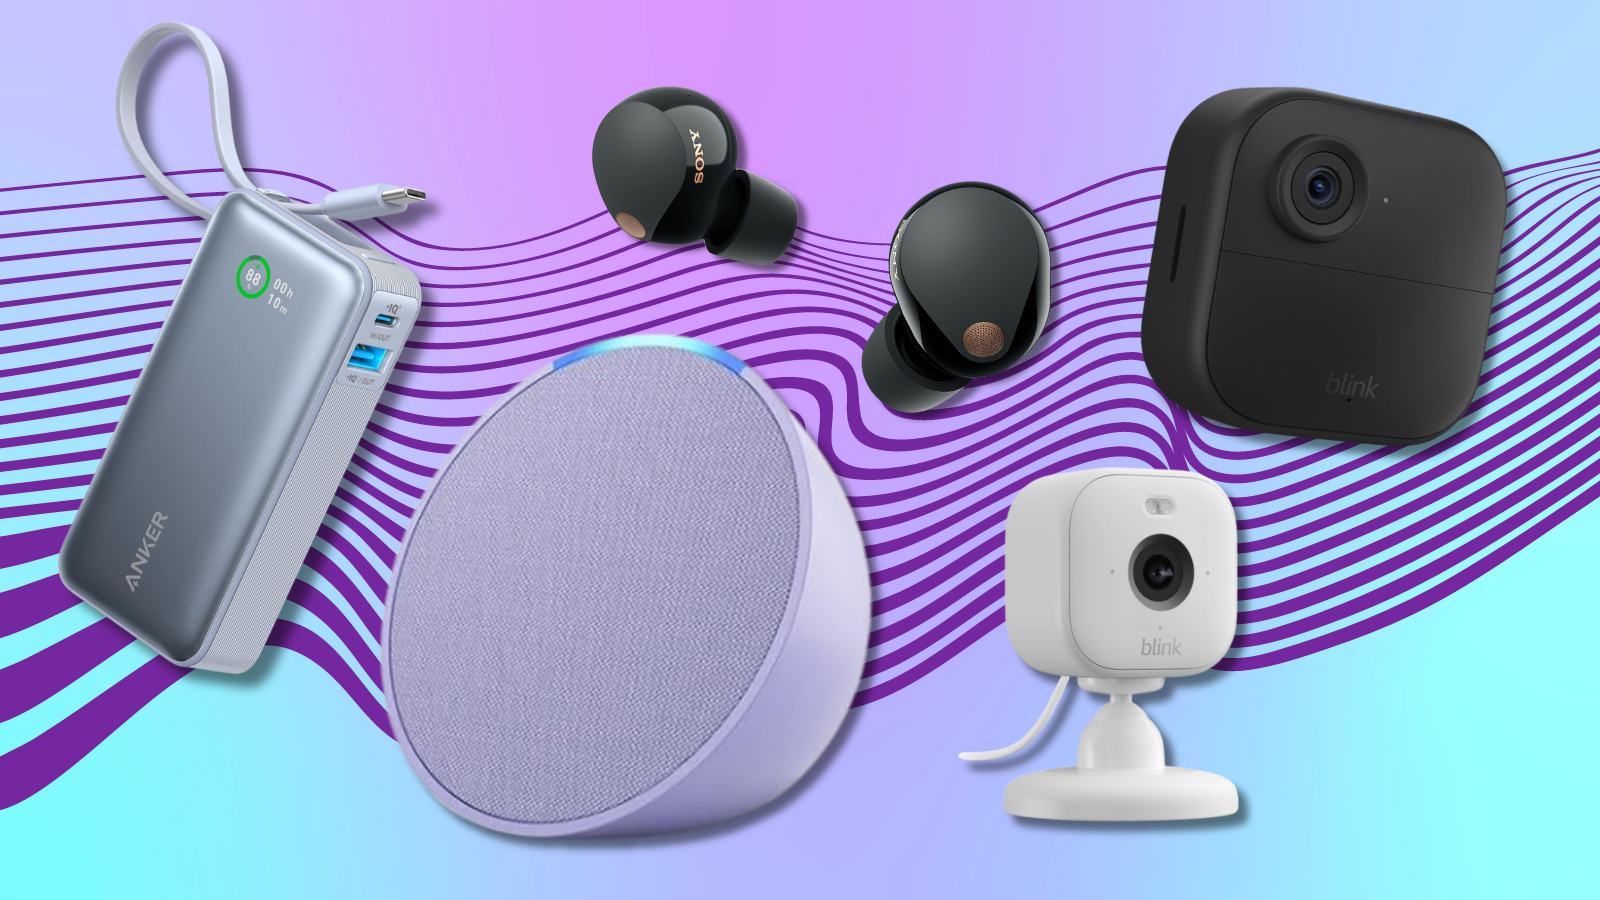 Anker power bank, Echo Pop speaker, Sony earbuds, and Blink cameras with blue and purple background